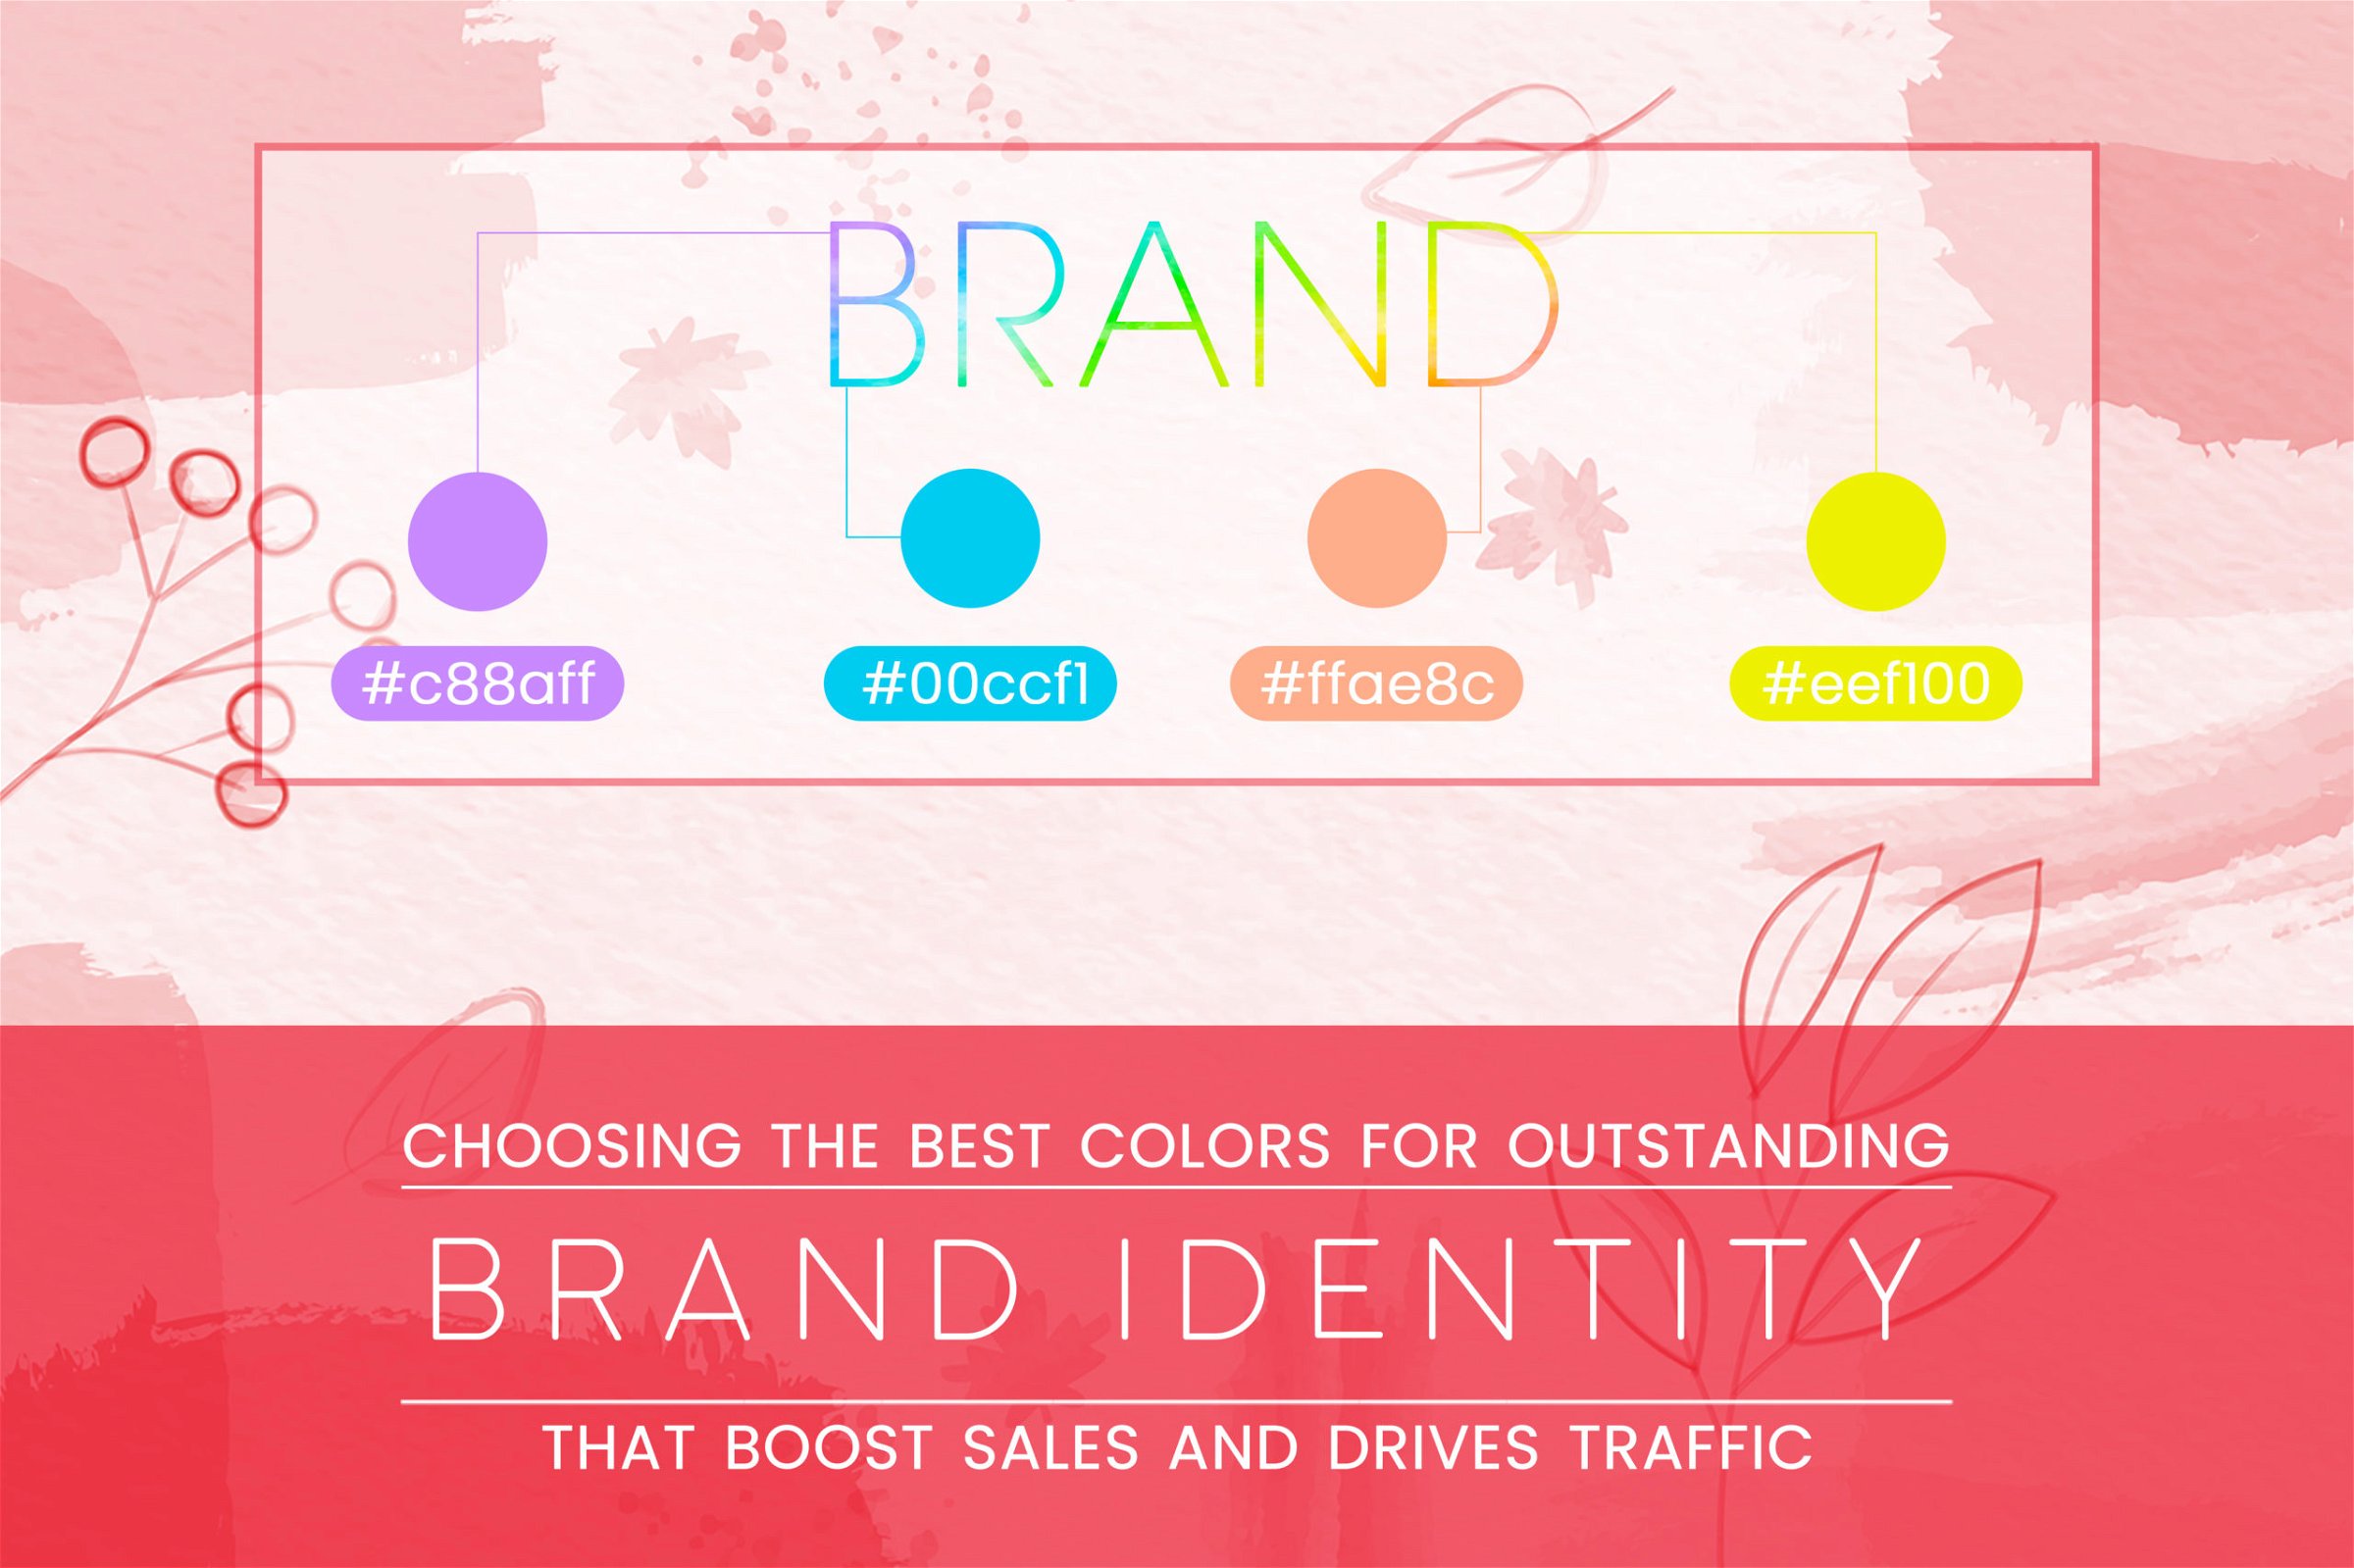 Choosing the right color for your brand